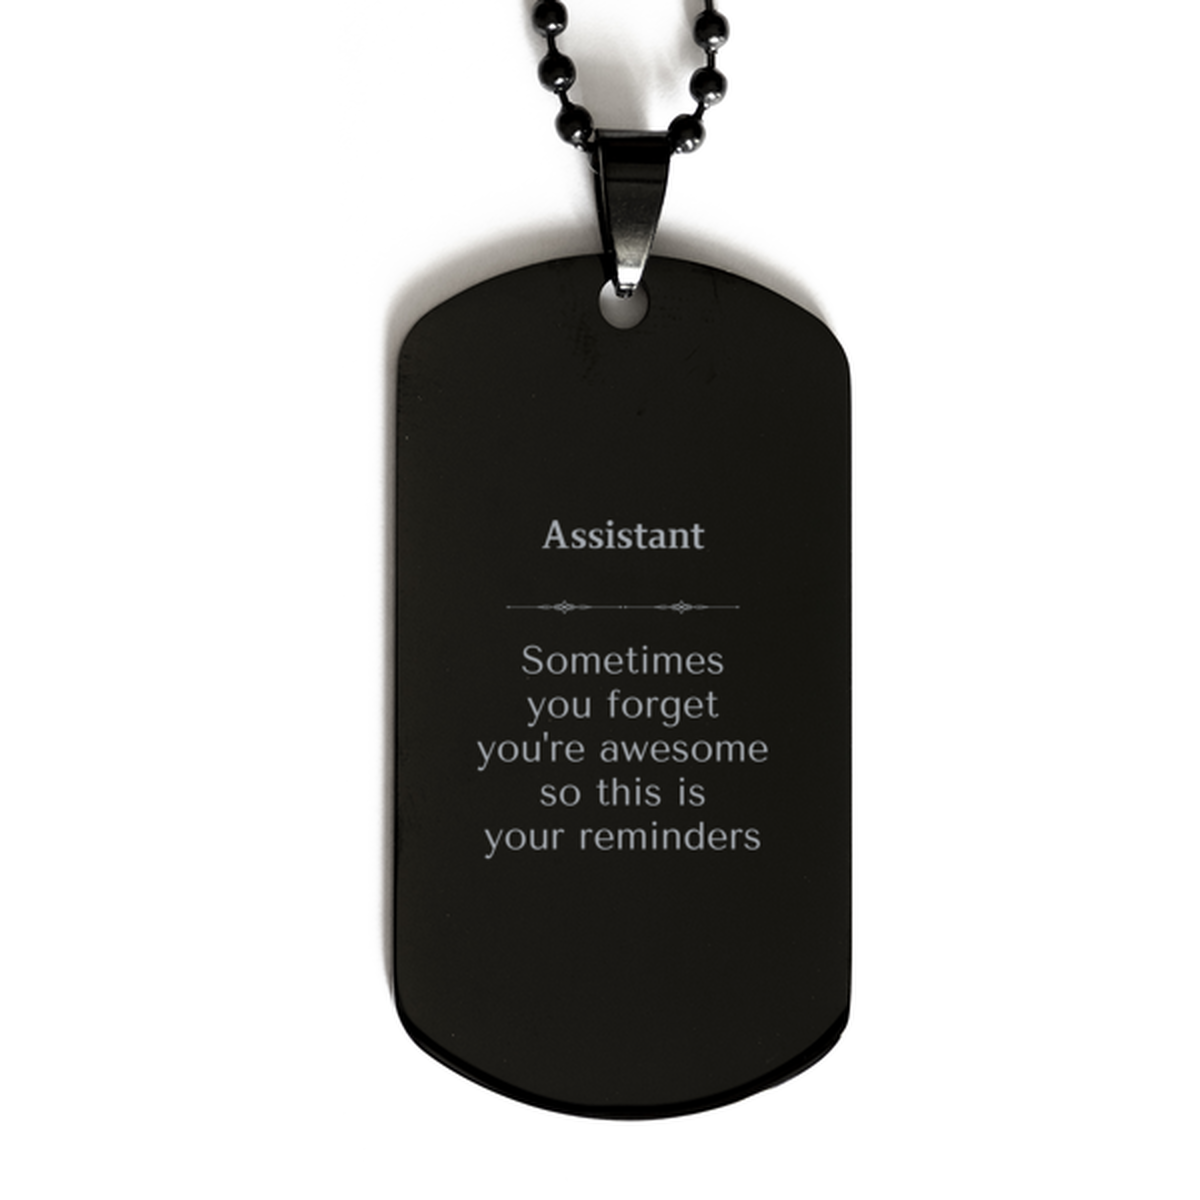 Sentimental Assistant Black Dog Tag, Assistant Sometimes you forget you're awesome so this is your reminders, Graduation Christmas Birthday Gifts for Assistant, Men, Women, Coworkers